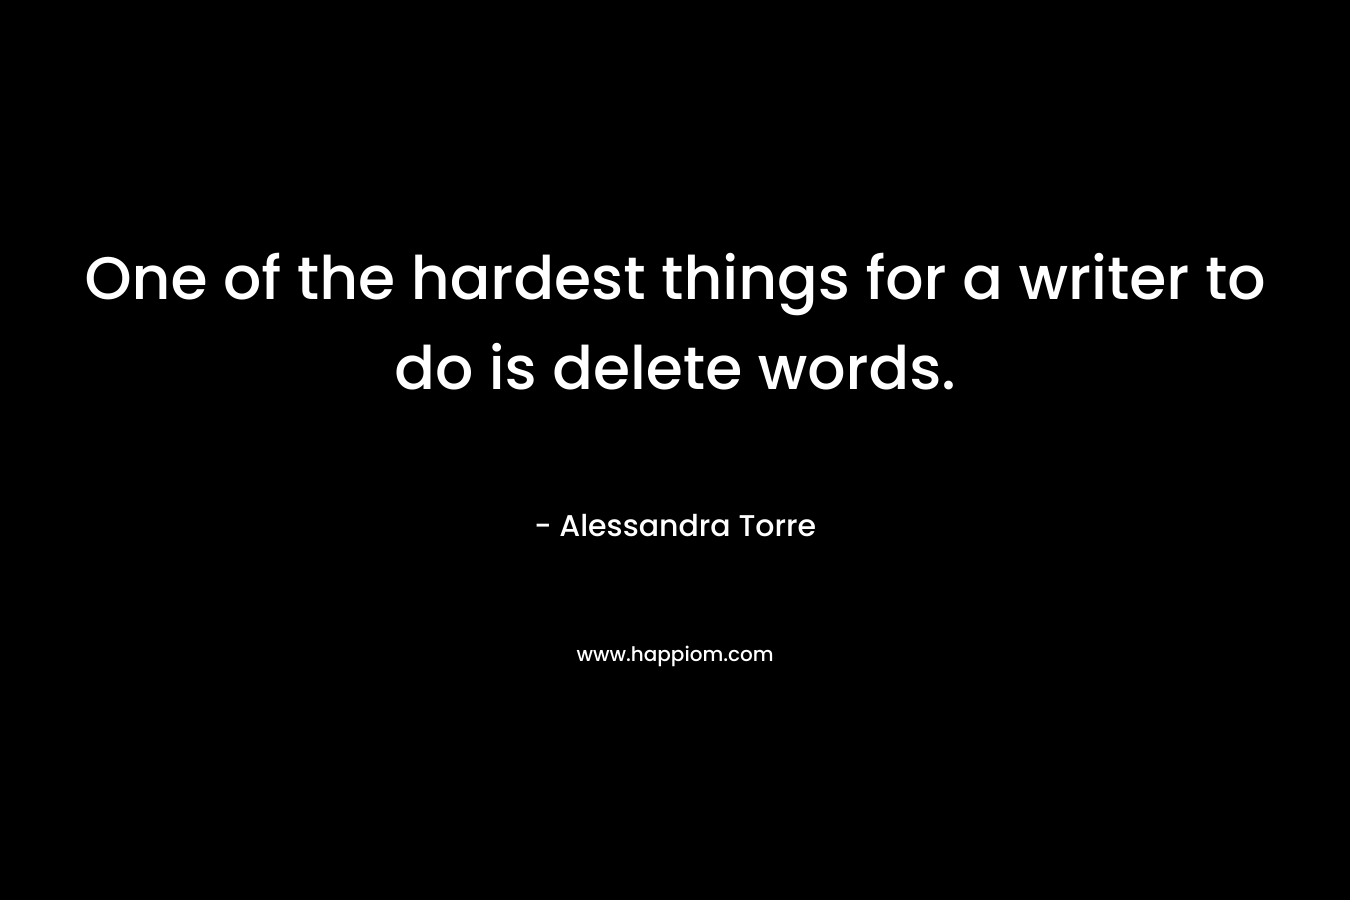 One of the hardest things for a writer to do is delete words. – Alessandra Torre